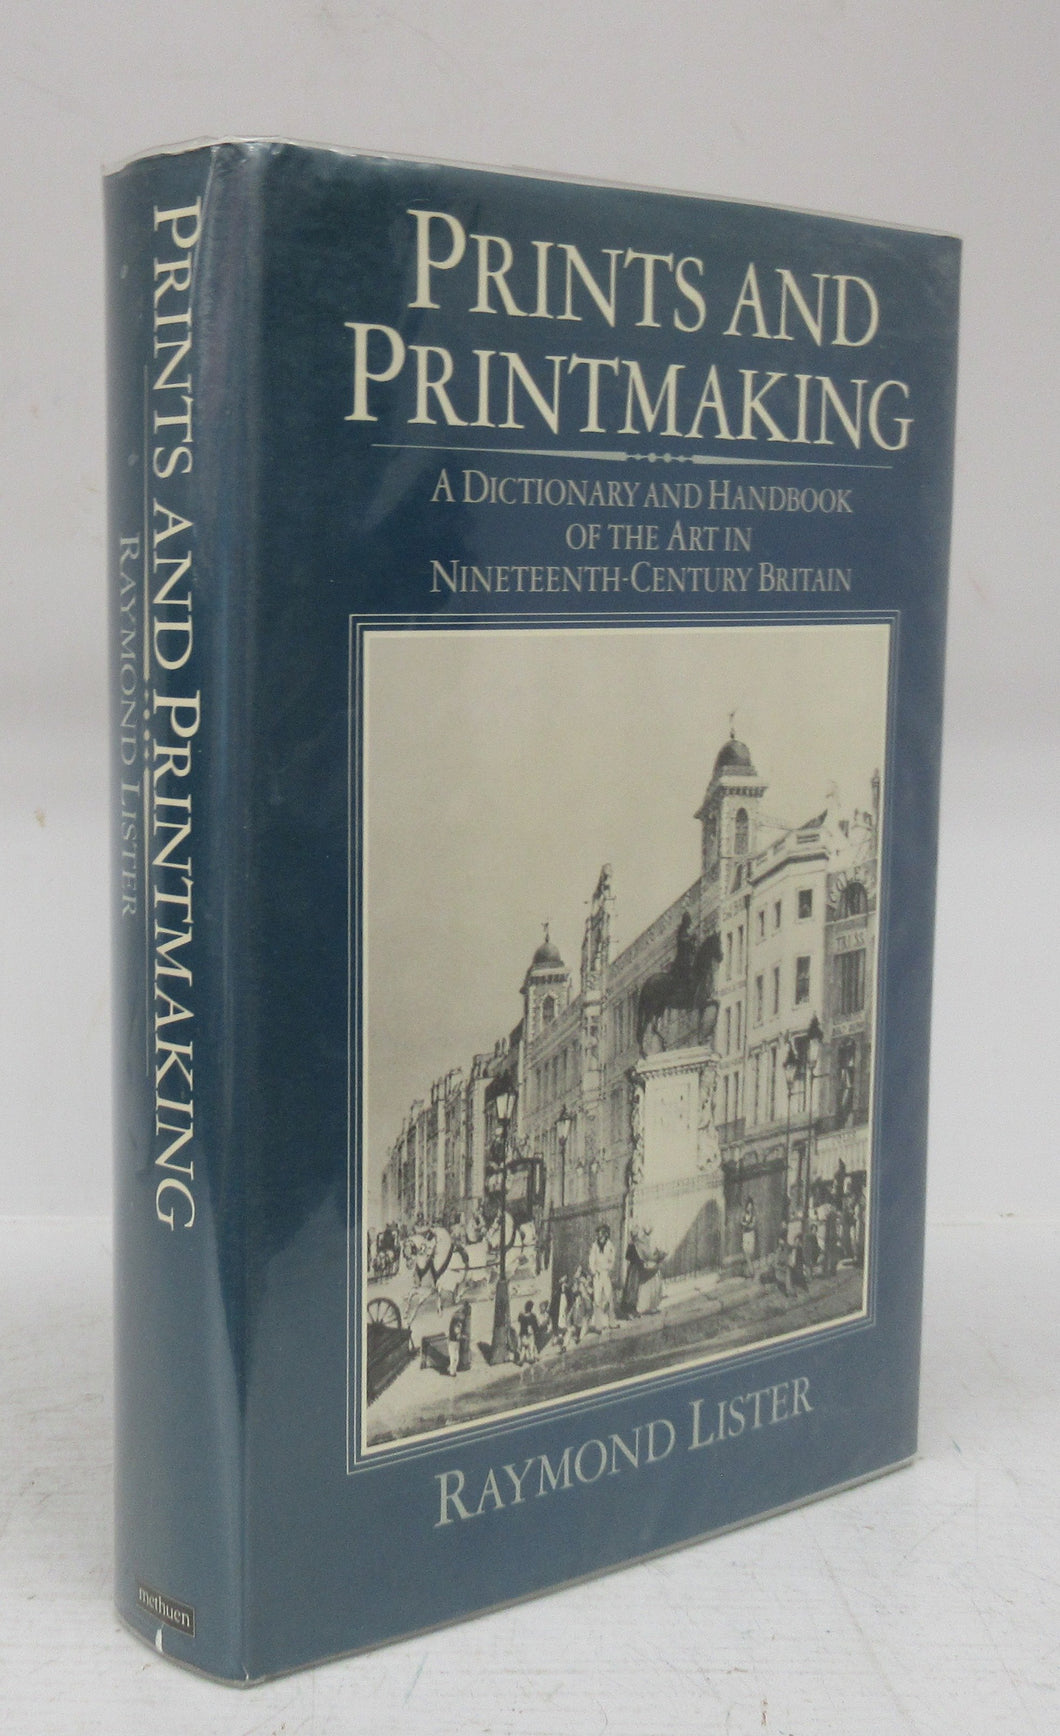 Prints and Printmaking: A Dictionary and Handbook of the Art in Nineteenth Century Britain